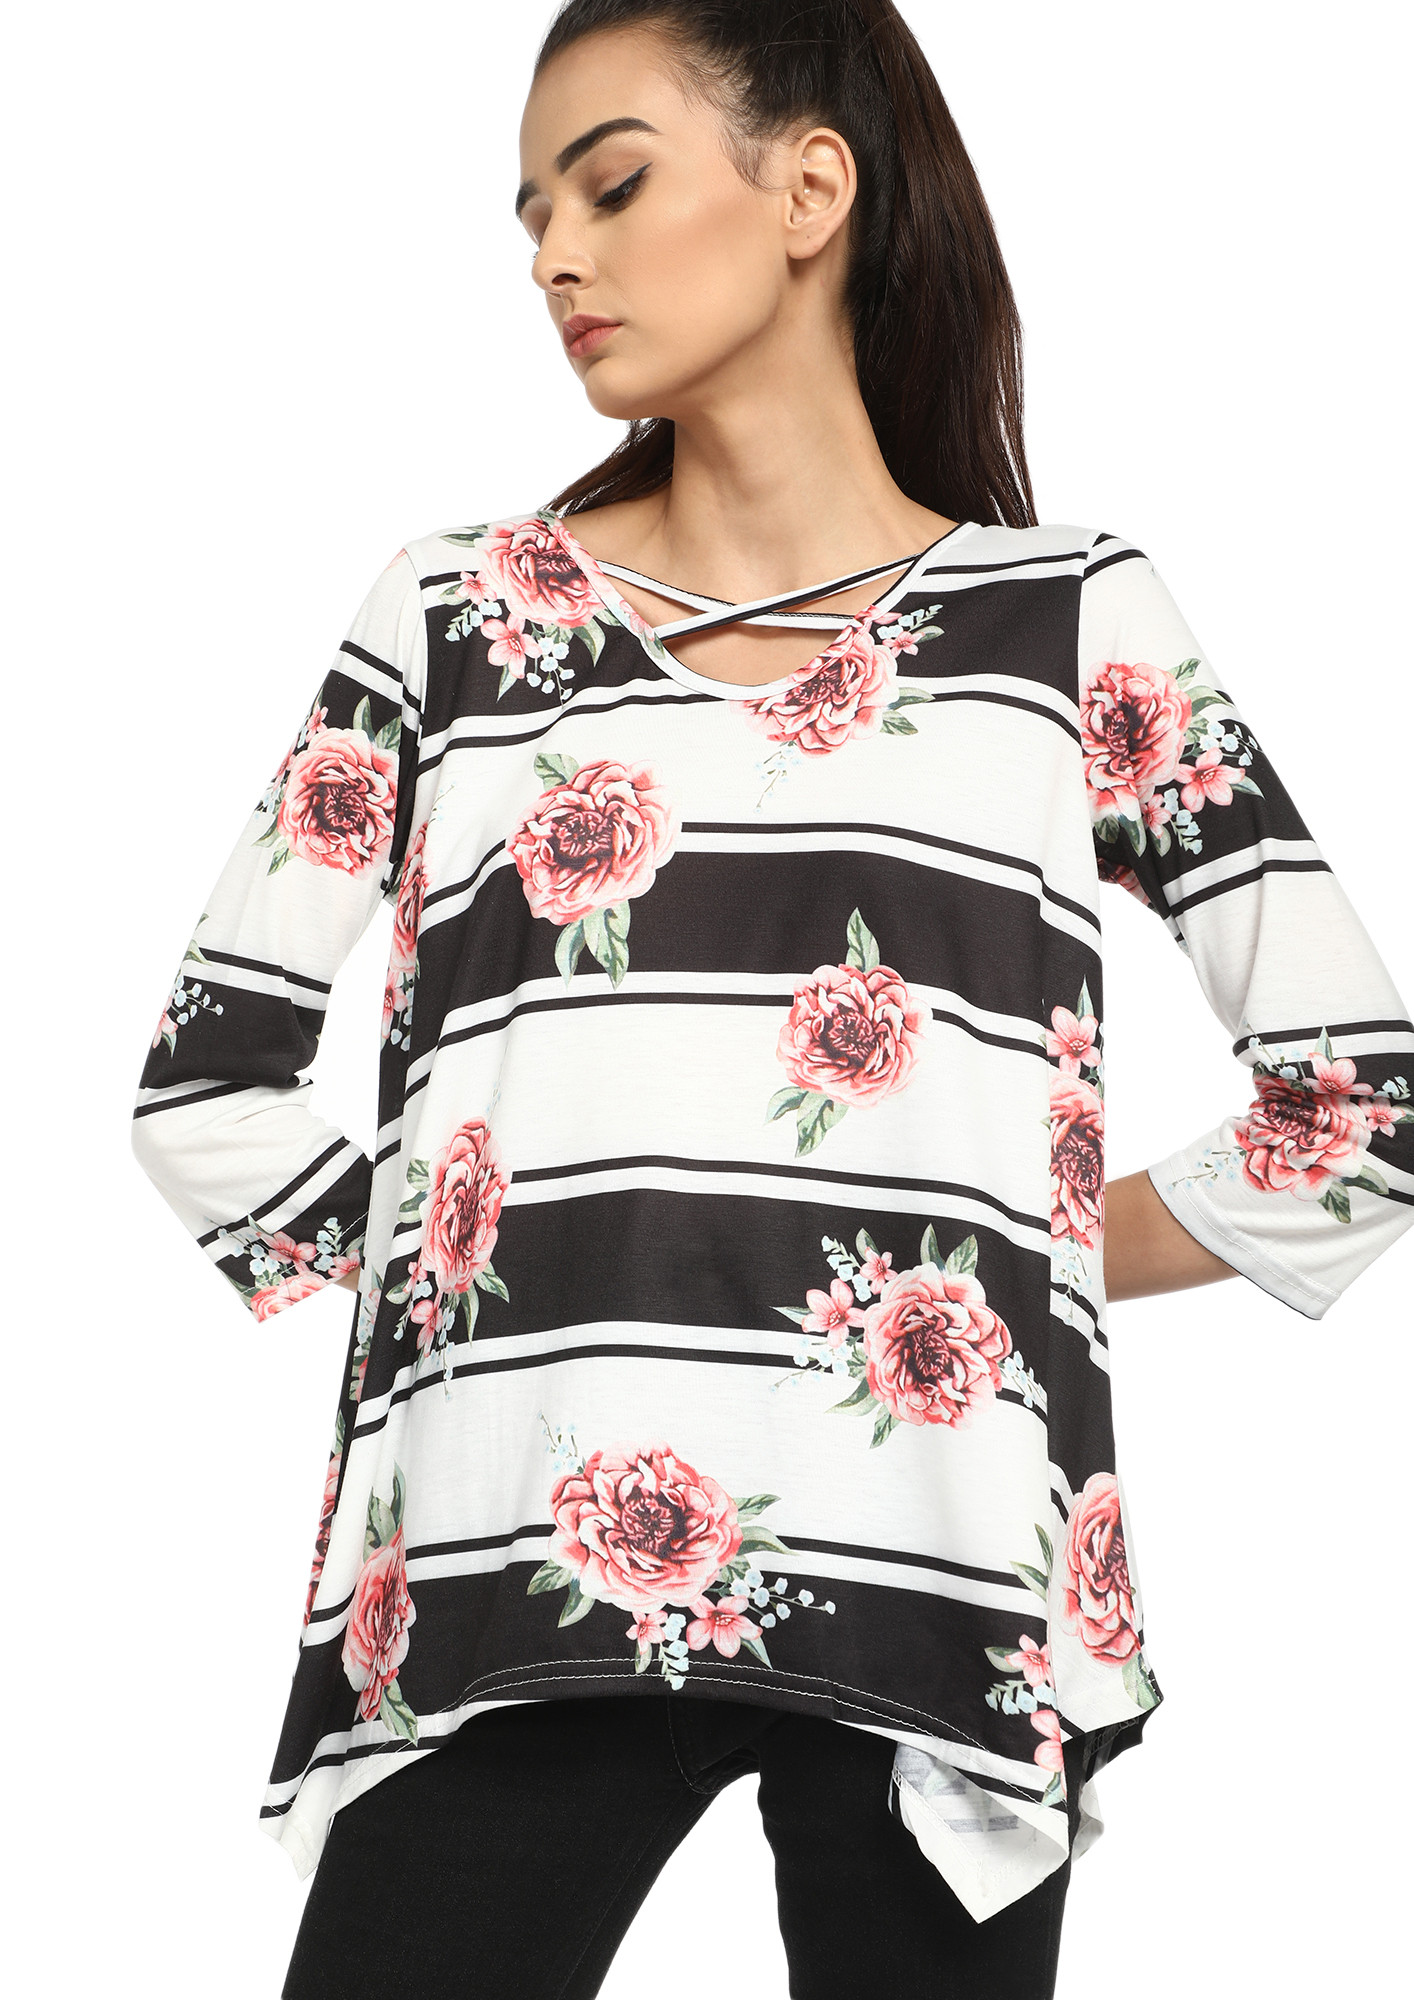 CARRYING MY ROSES ALONG BLACK TUNIC TOP